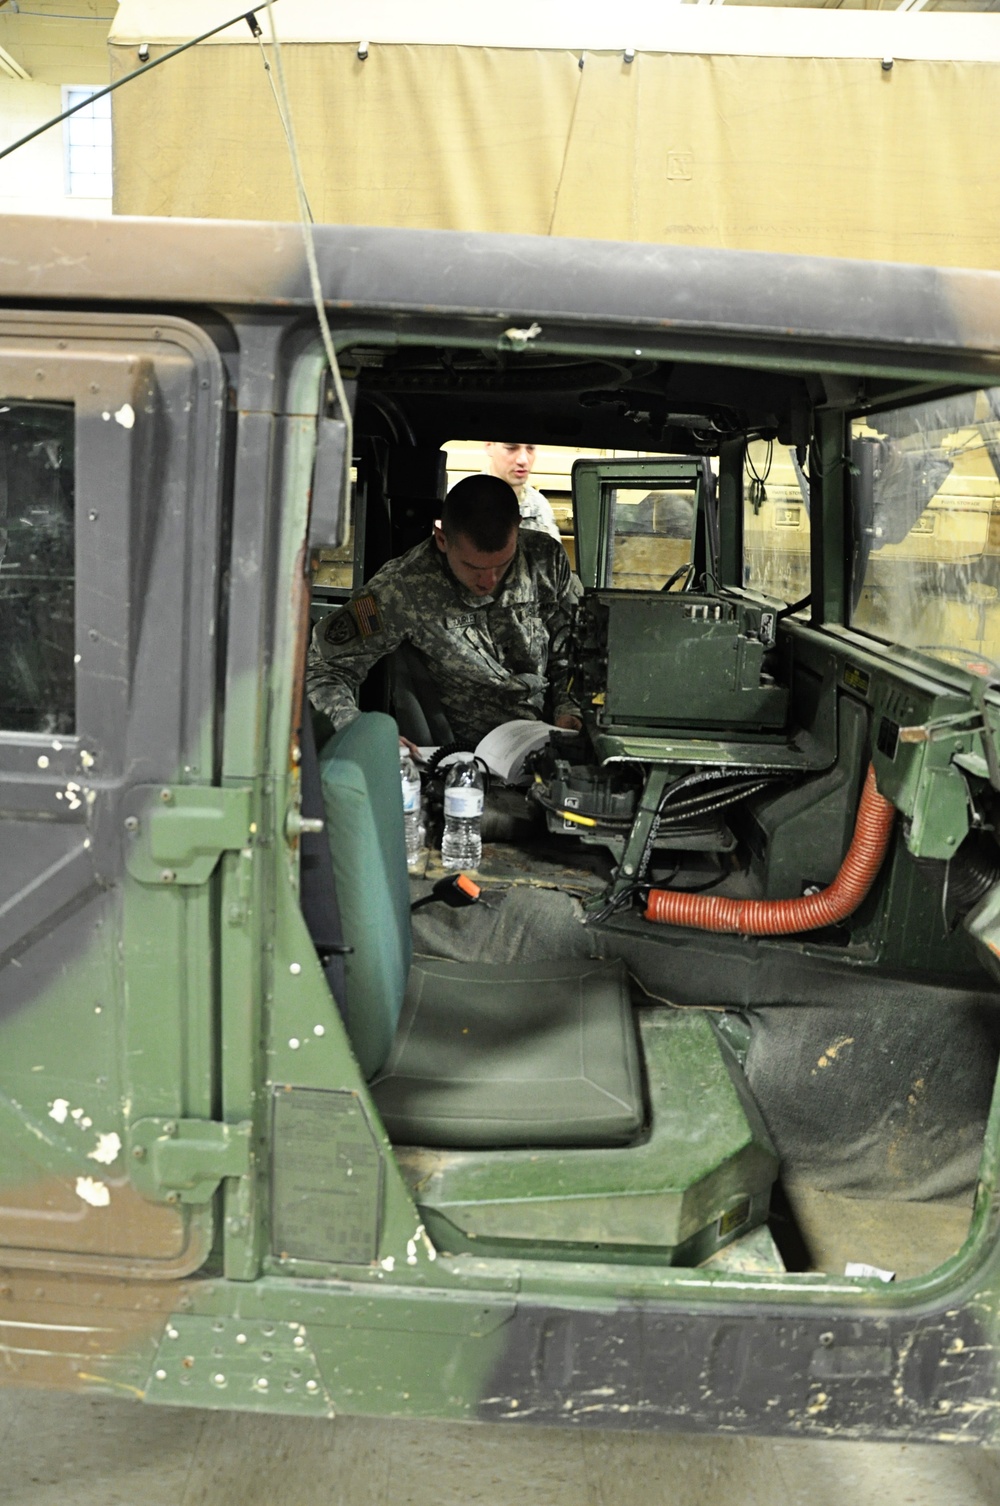 Virginia Guard soldiers prep for winter weather response operations